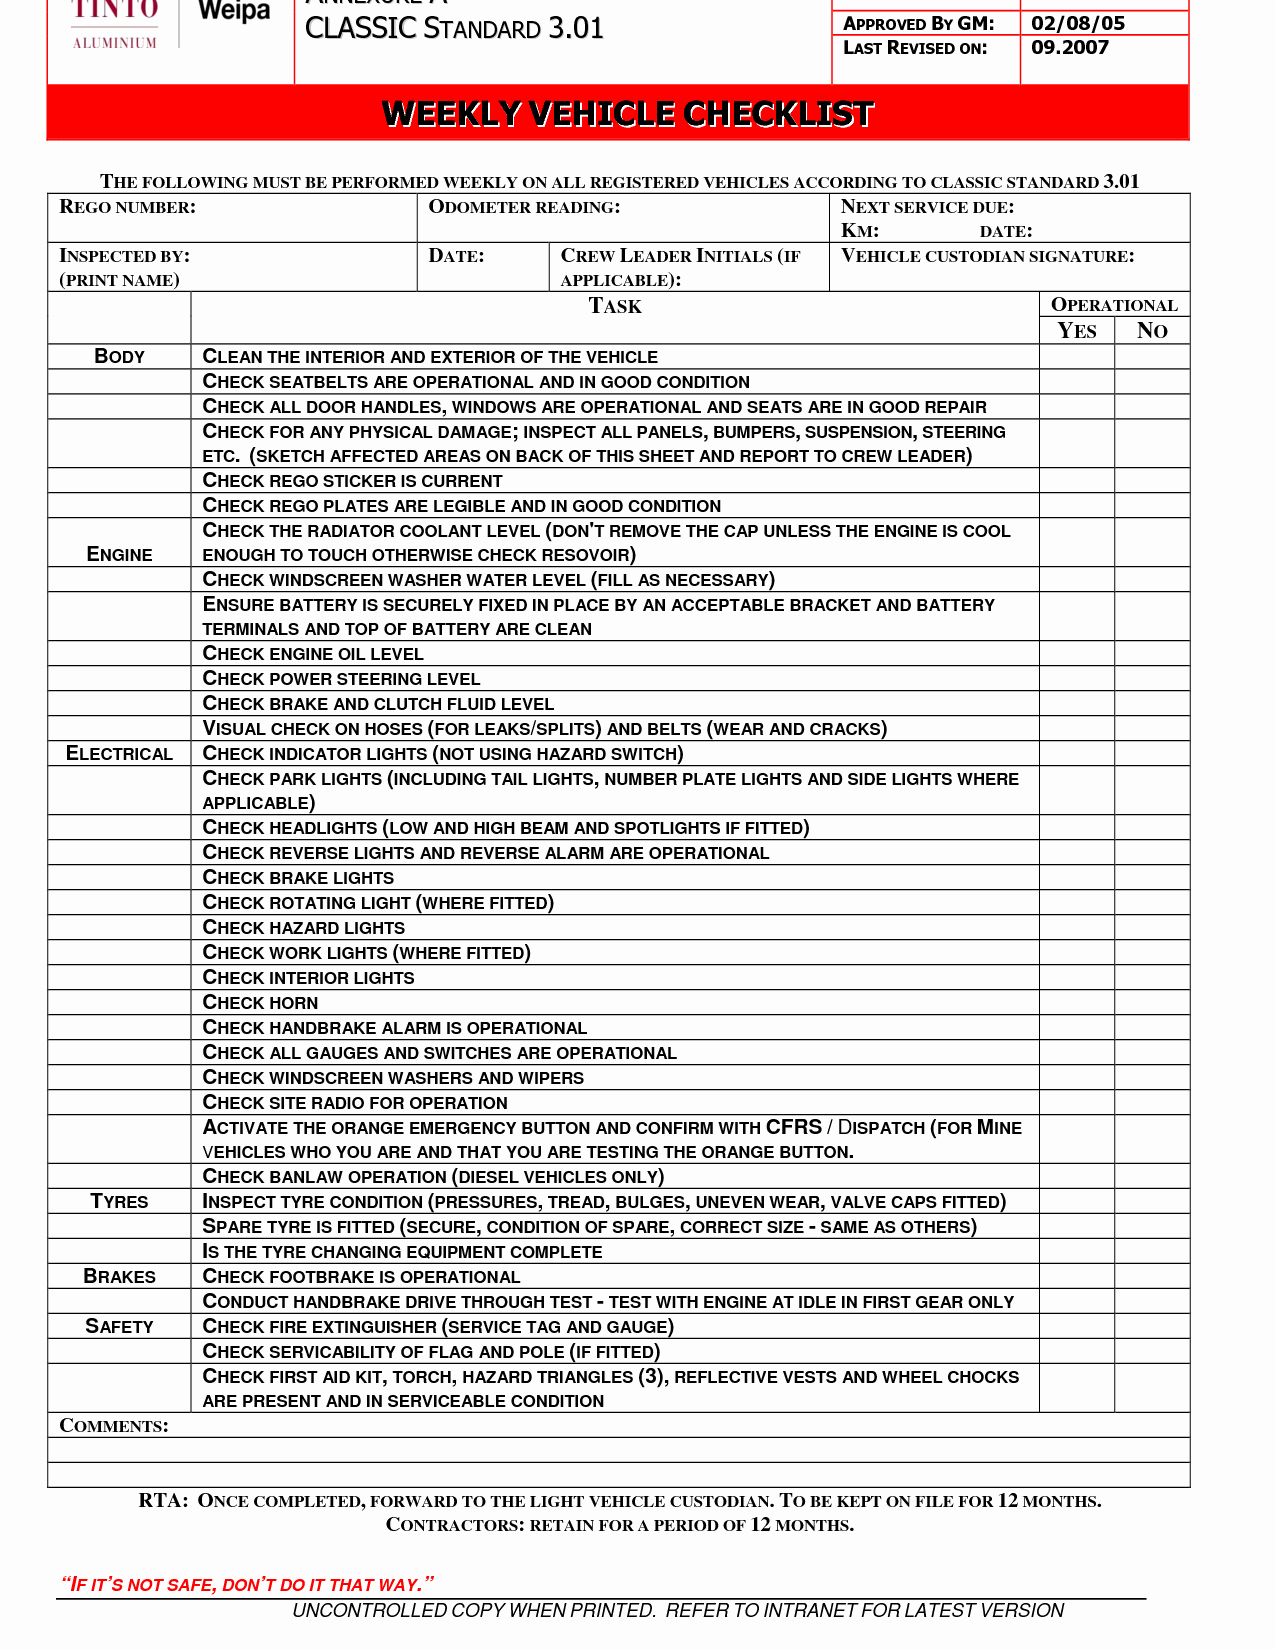 Vehicle Check Sheet Template New Pin by Lone Wolf software On Car Maintenance Tips